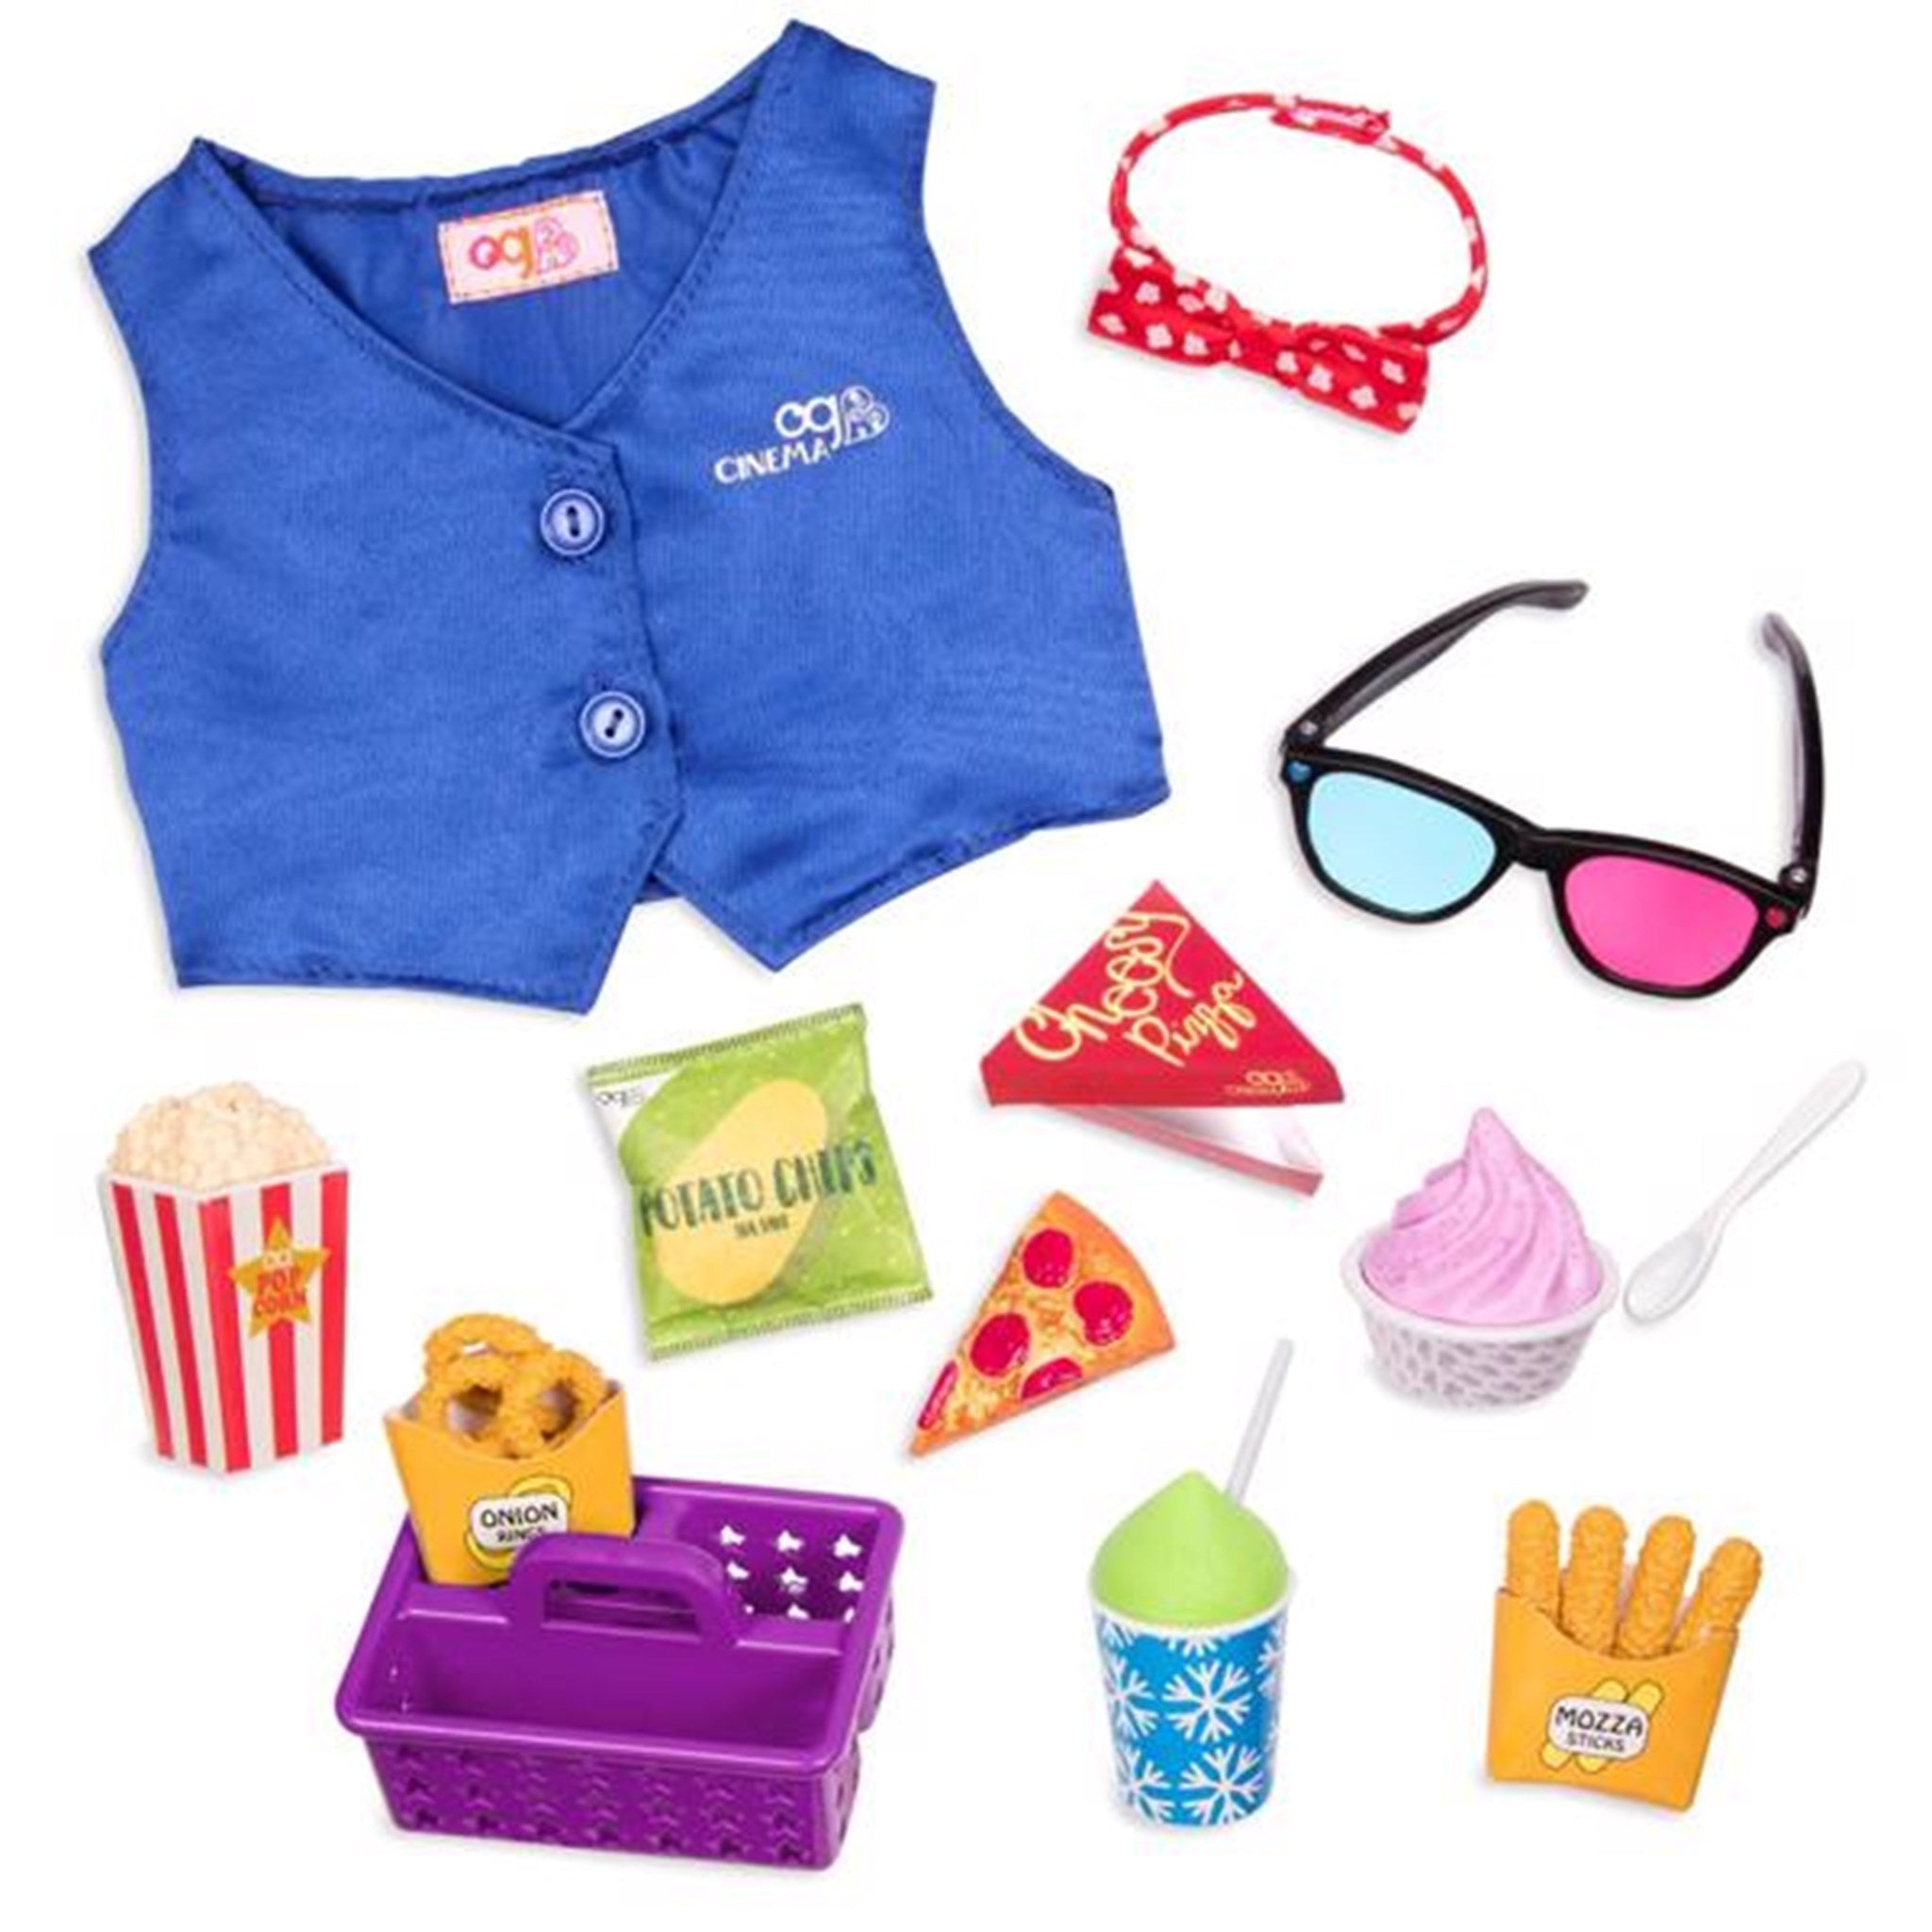 Our Generation Doll Accessories - Cinema Snacks